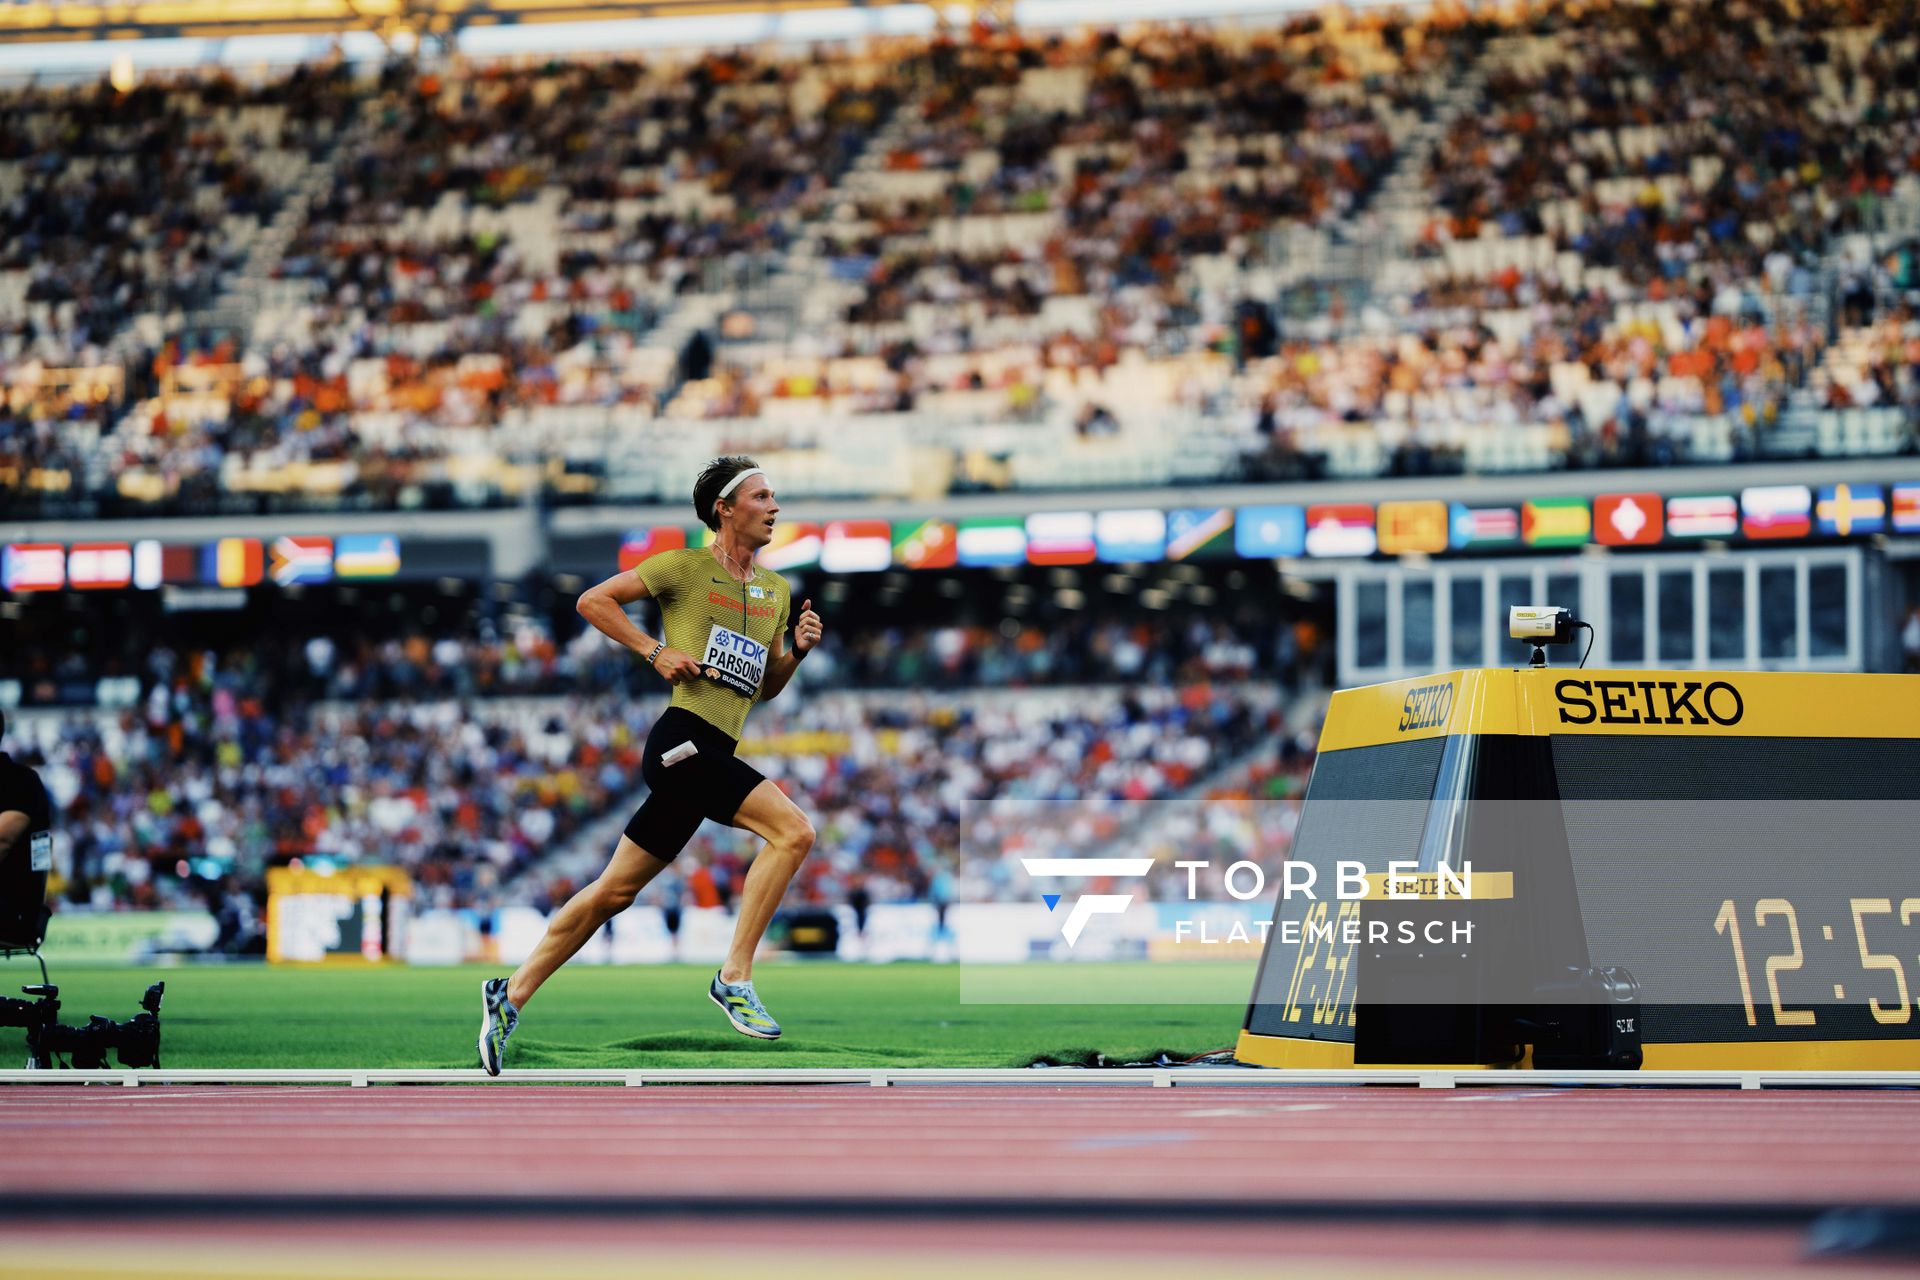 Sam Parsons (GER/Germany) during the 5000 Metres on Day 6 of the World Athletics Championships Budapest 23 at the National Athletics Centre in Budapest, Hungary on August 24, 2023.